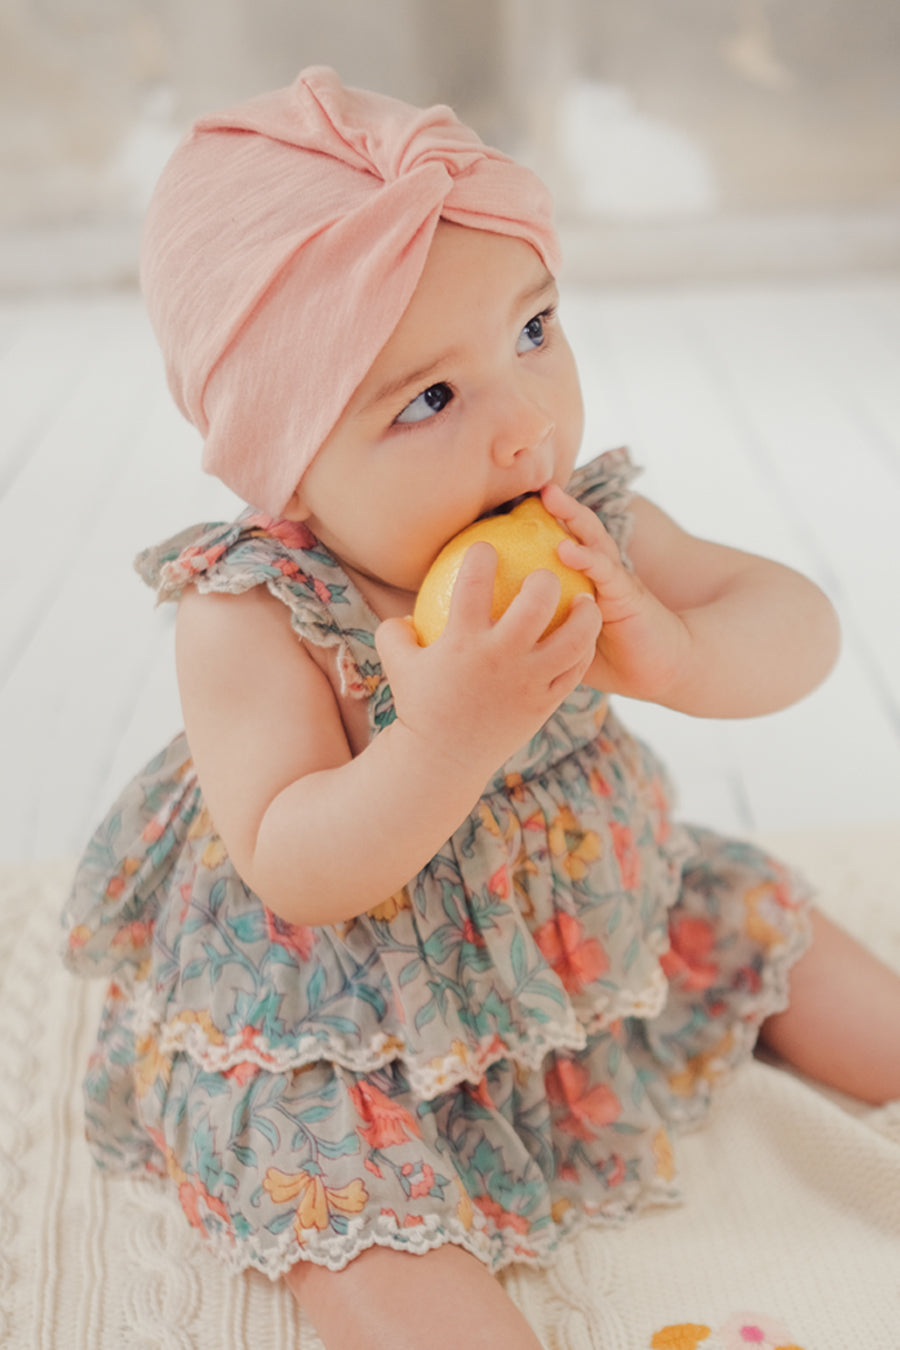 Find baby clothes from a wide variety of premium kids clothes brands for every occasion, from preemie, newborn and layette to special events. From organic baby onesies to baby girls dresses, tops and bottoms, find a broad selection of baby clothes for eve